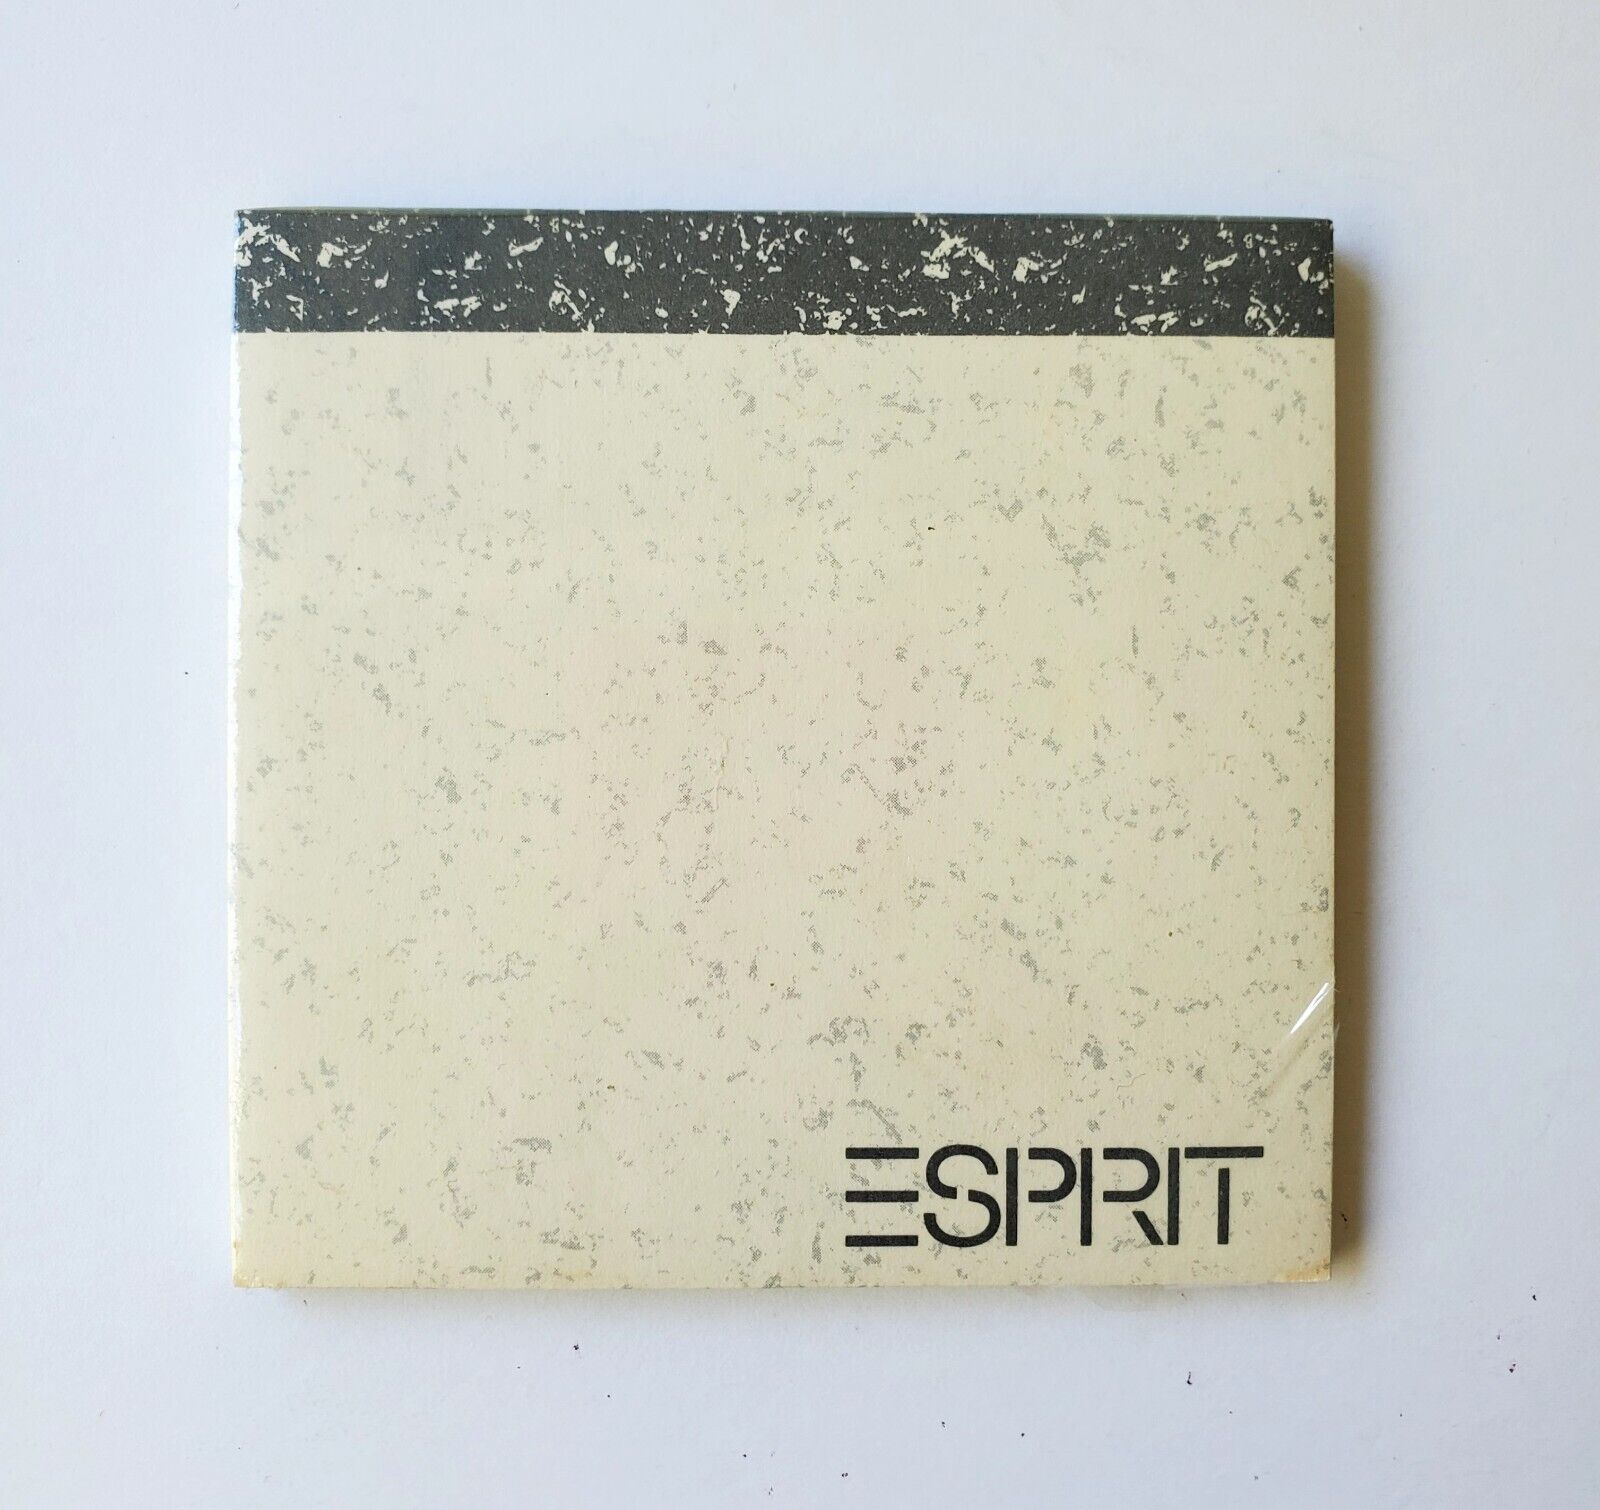 Vintage ESPRIT Stationery Notes Paper Note Pad in White & Gray - New